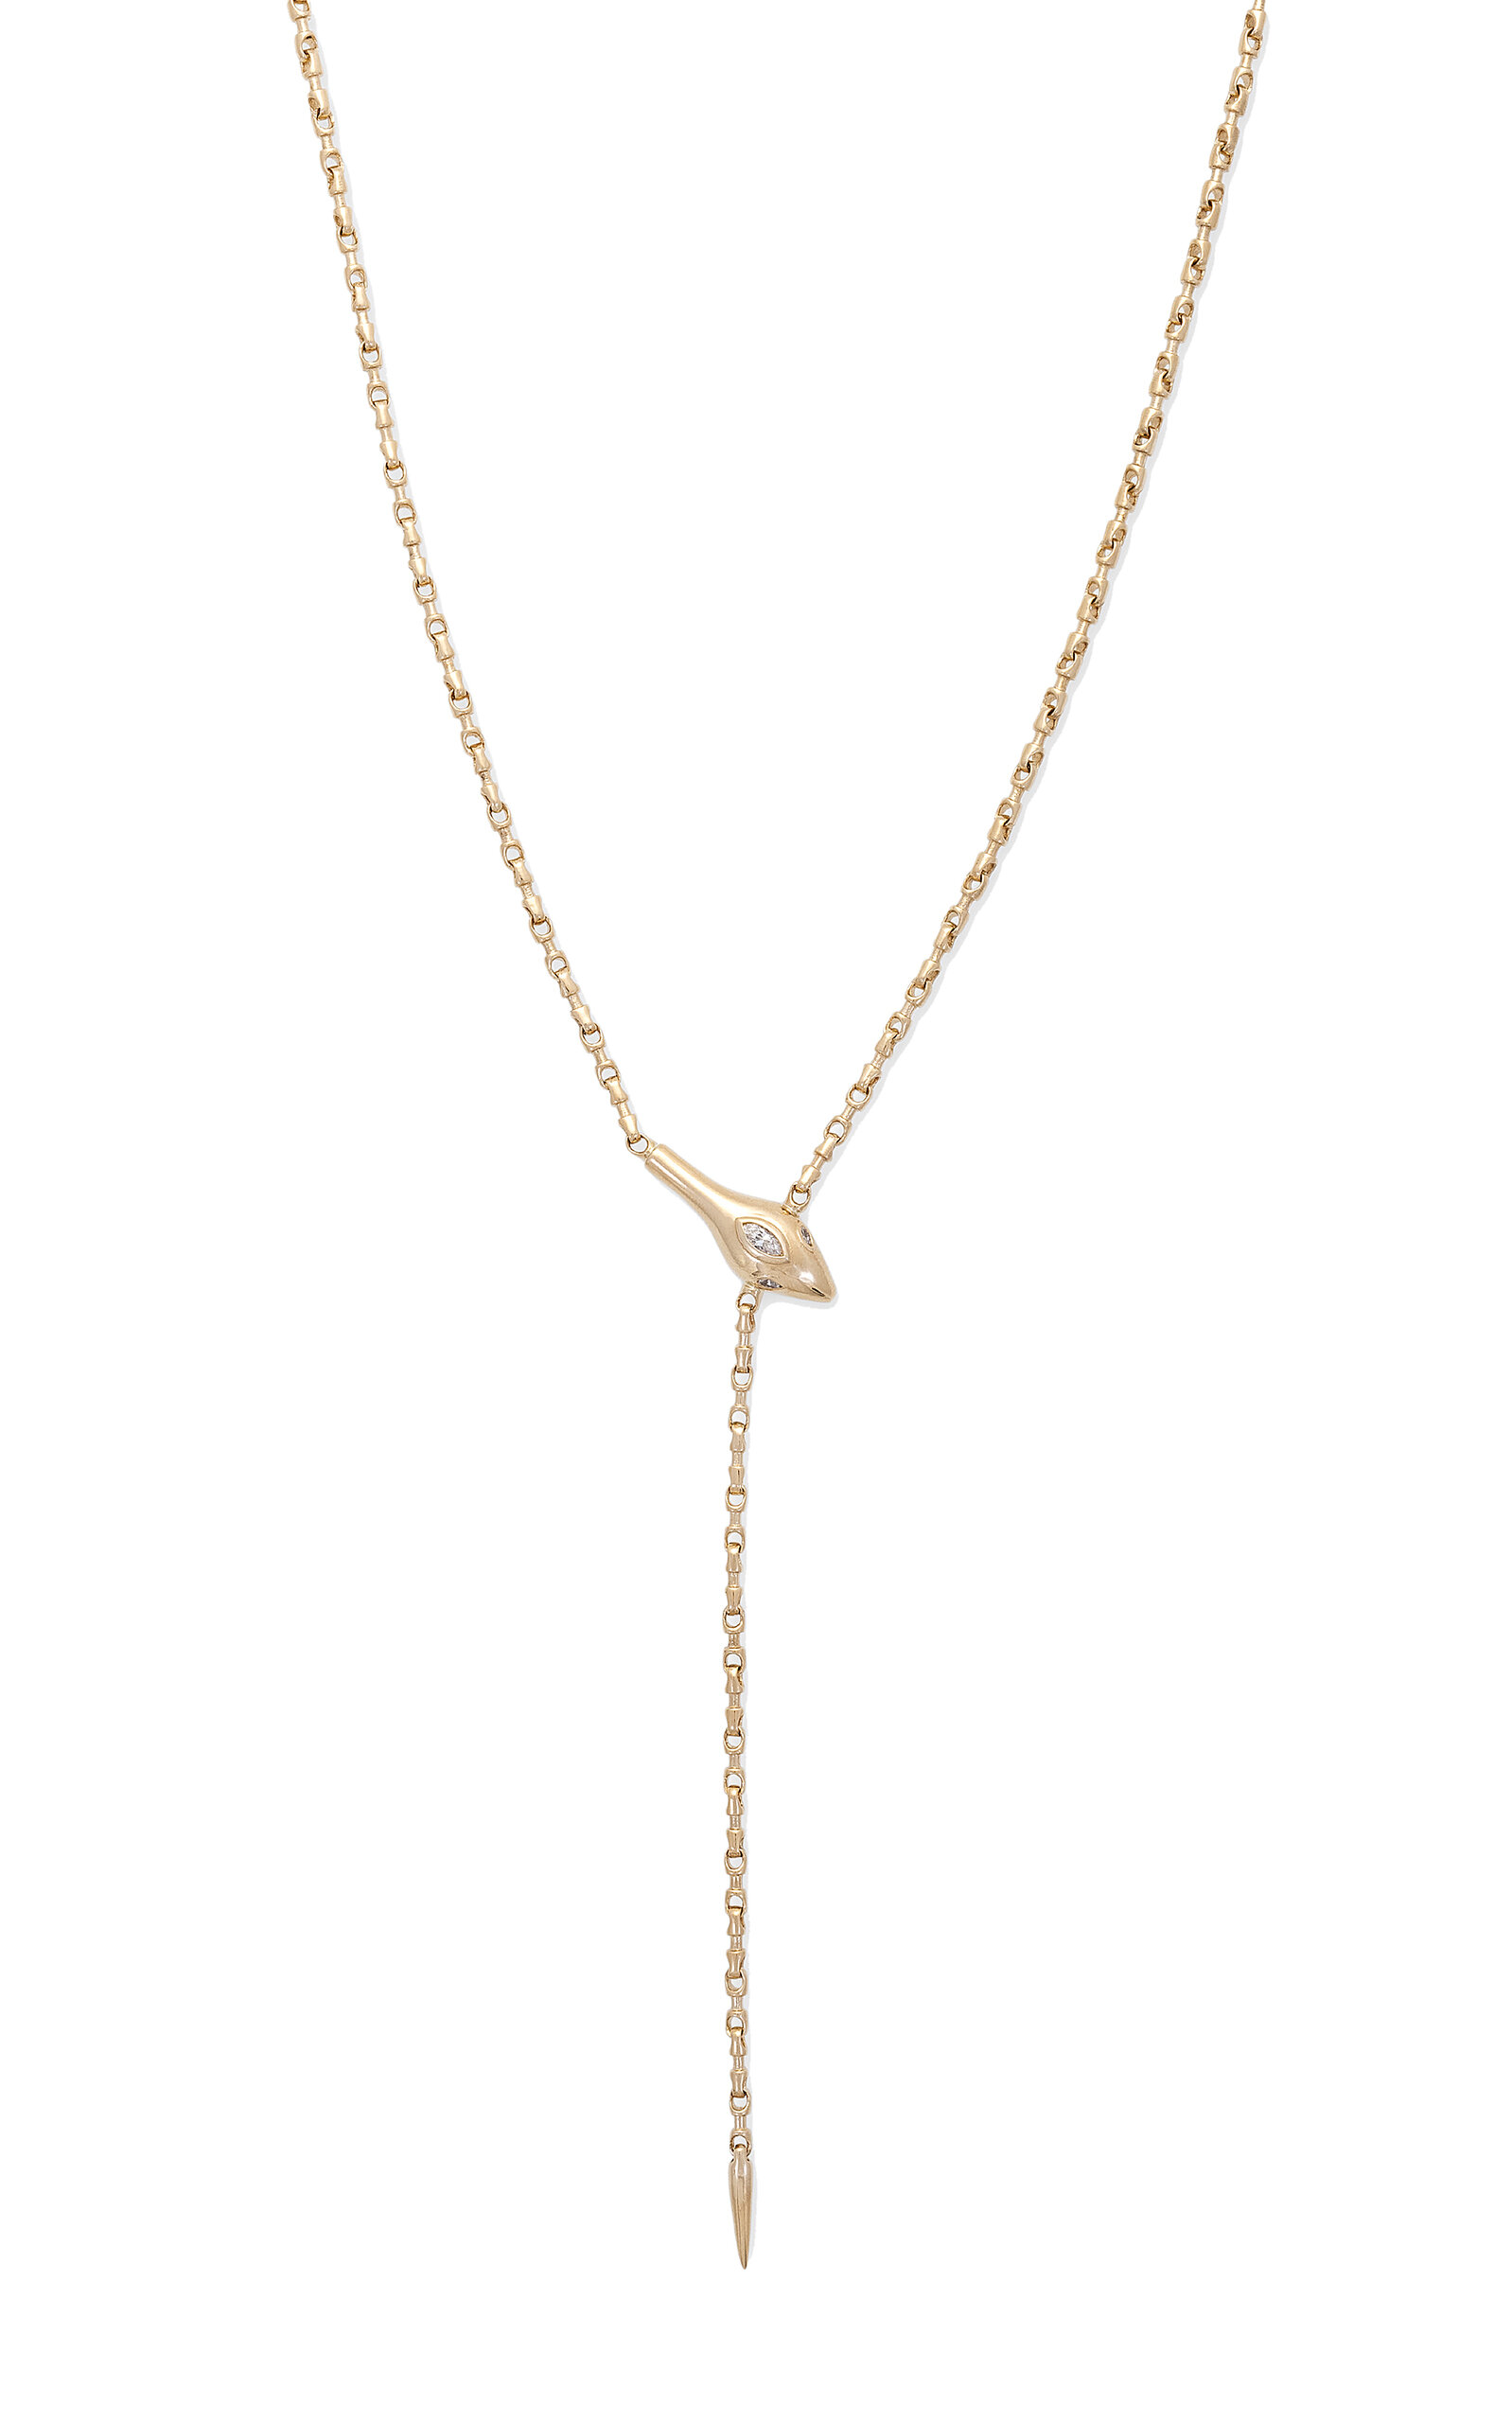 Jacquie Aiche Rolo Snake 14k Yellow Gold Diamond Lariat Necklace